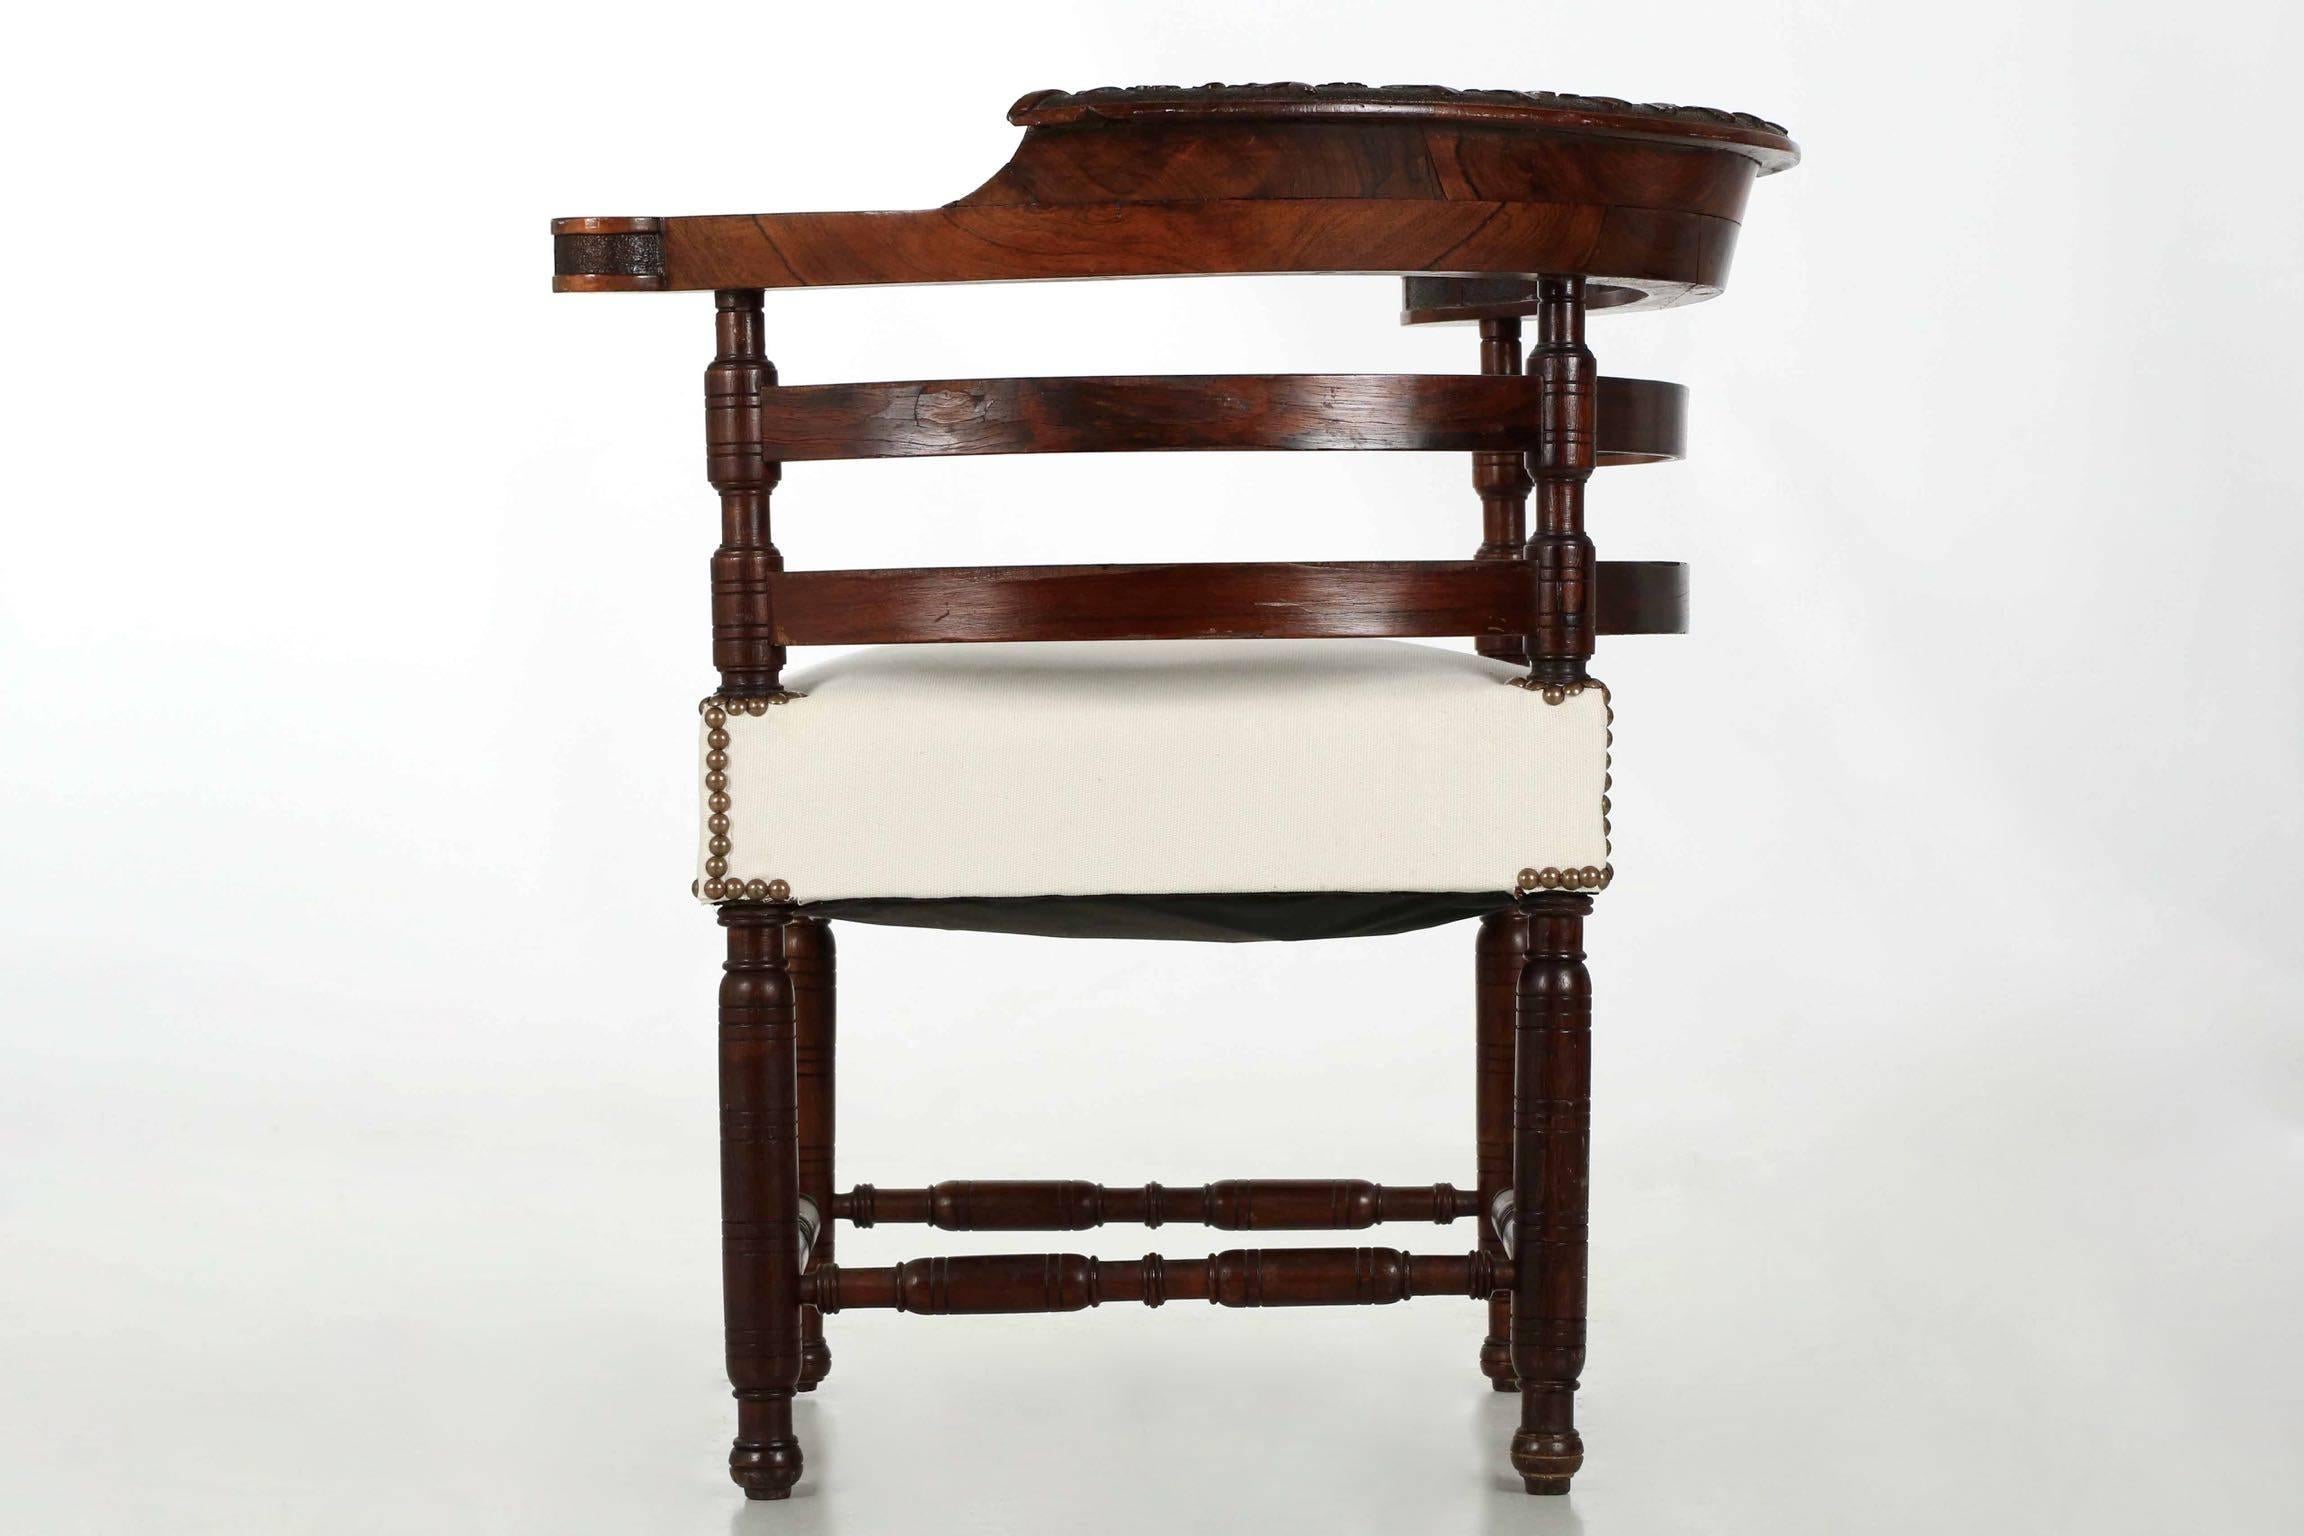 19th Century Aesthetic Movement Carved Rosewood Corner Chair, circa 1880